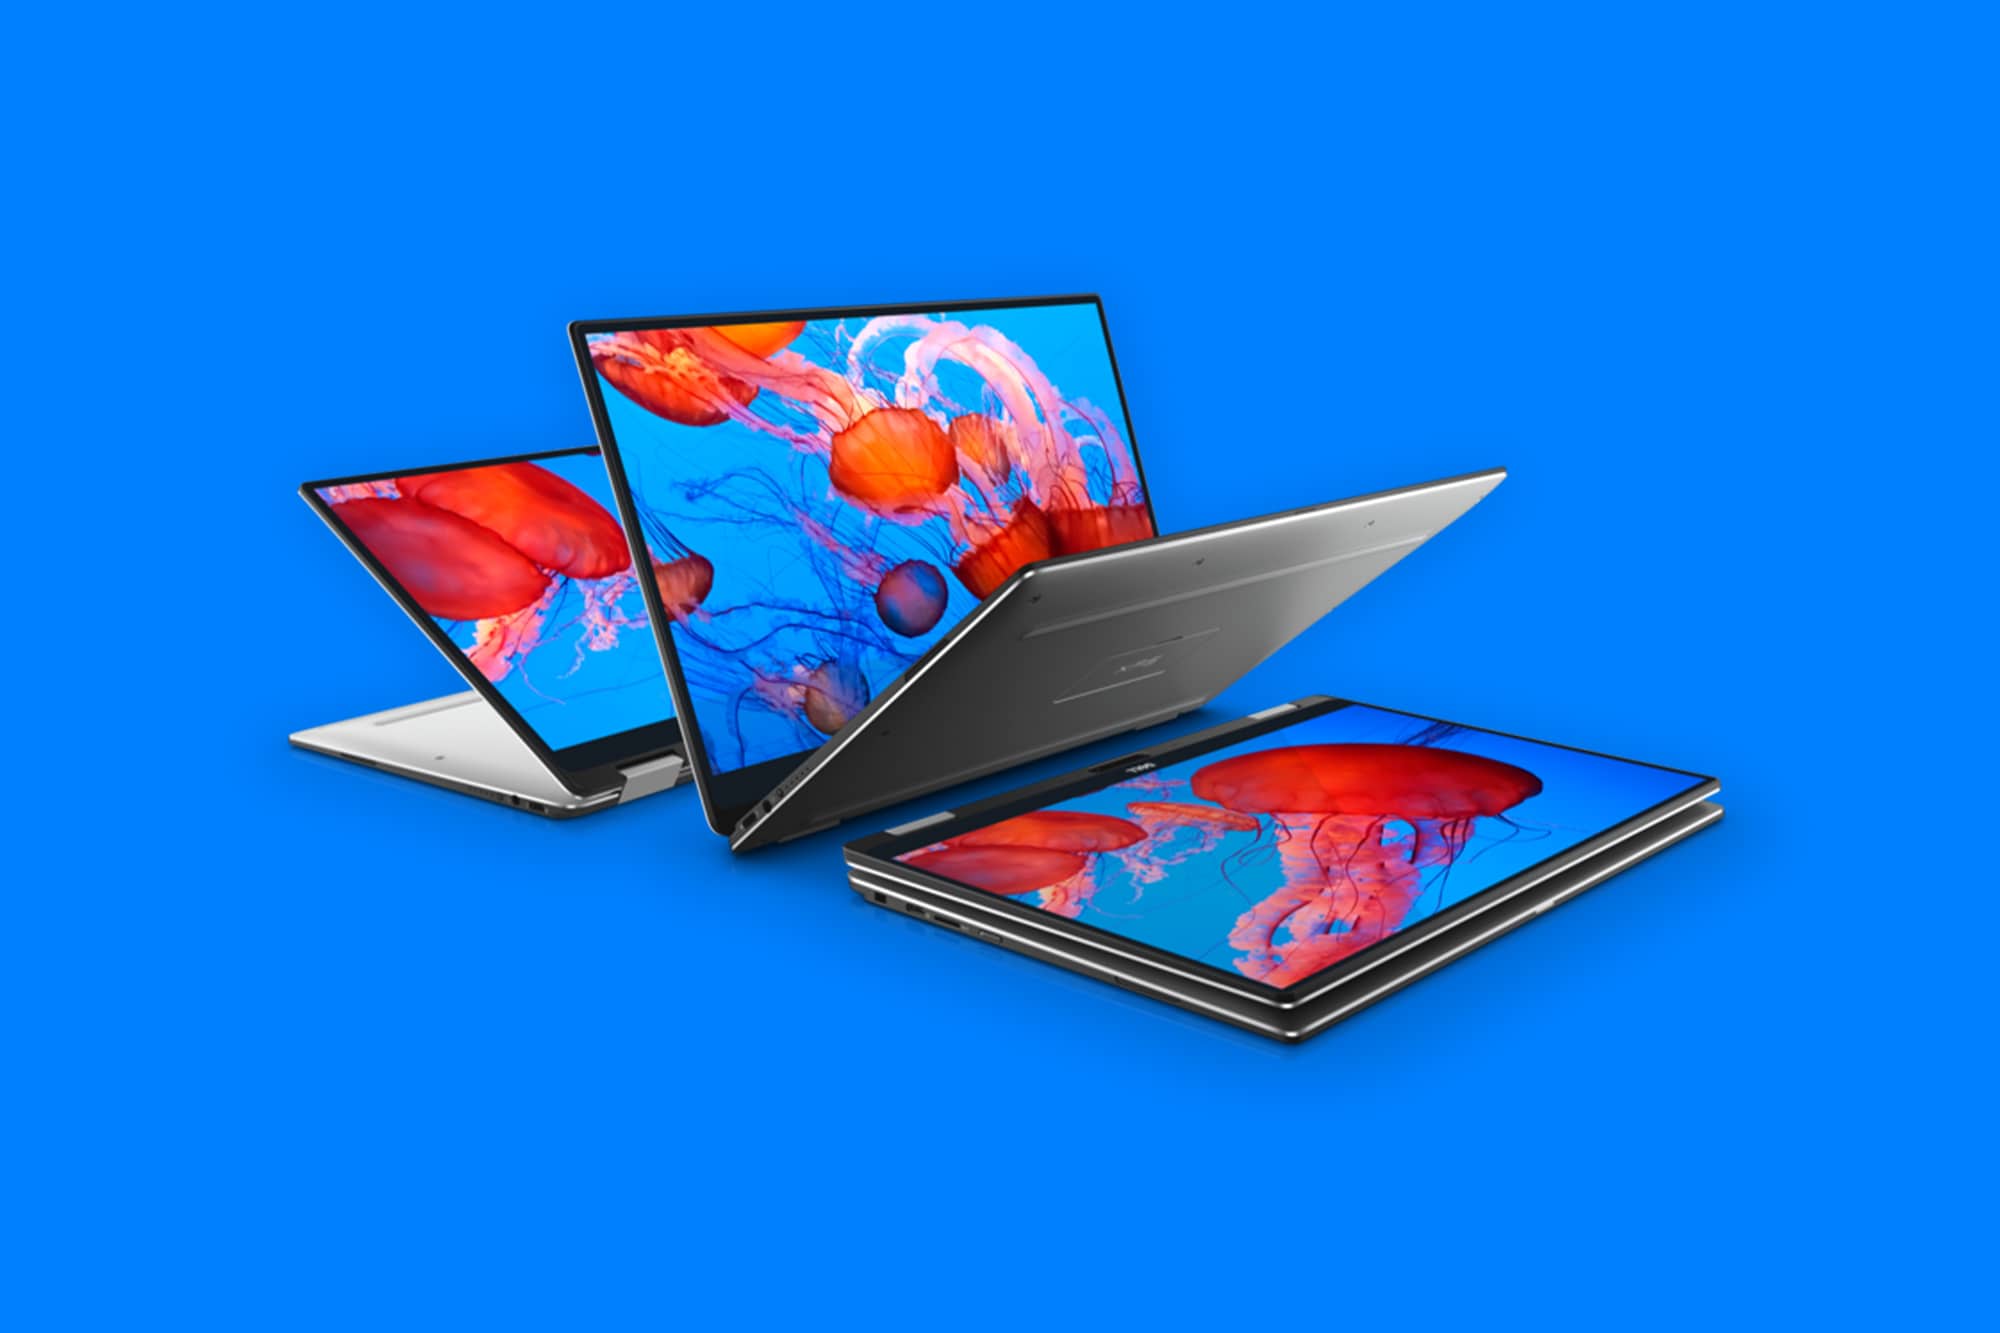 This is the cover photo for our Best 13 Inch Laptops article. It features a Dell XPS 13 laptop overlaying a royal blue background.